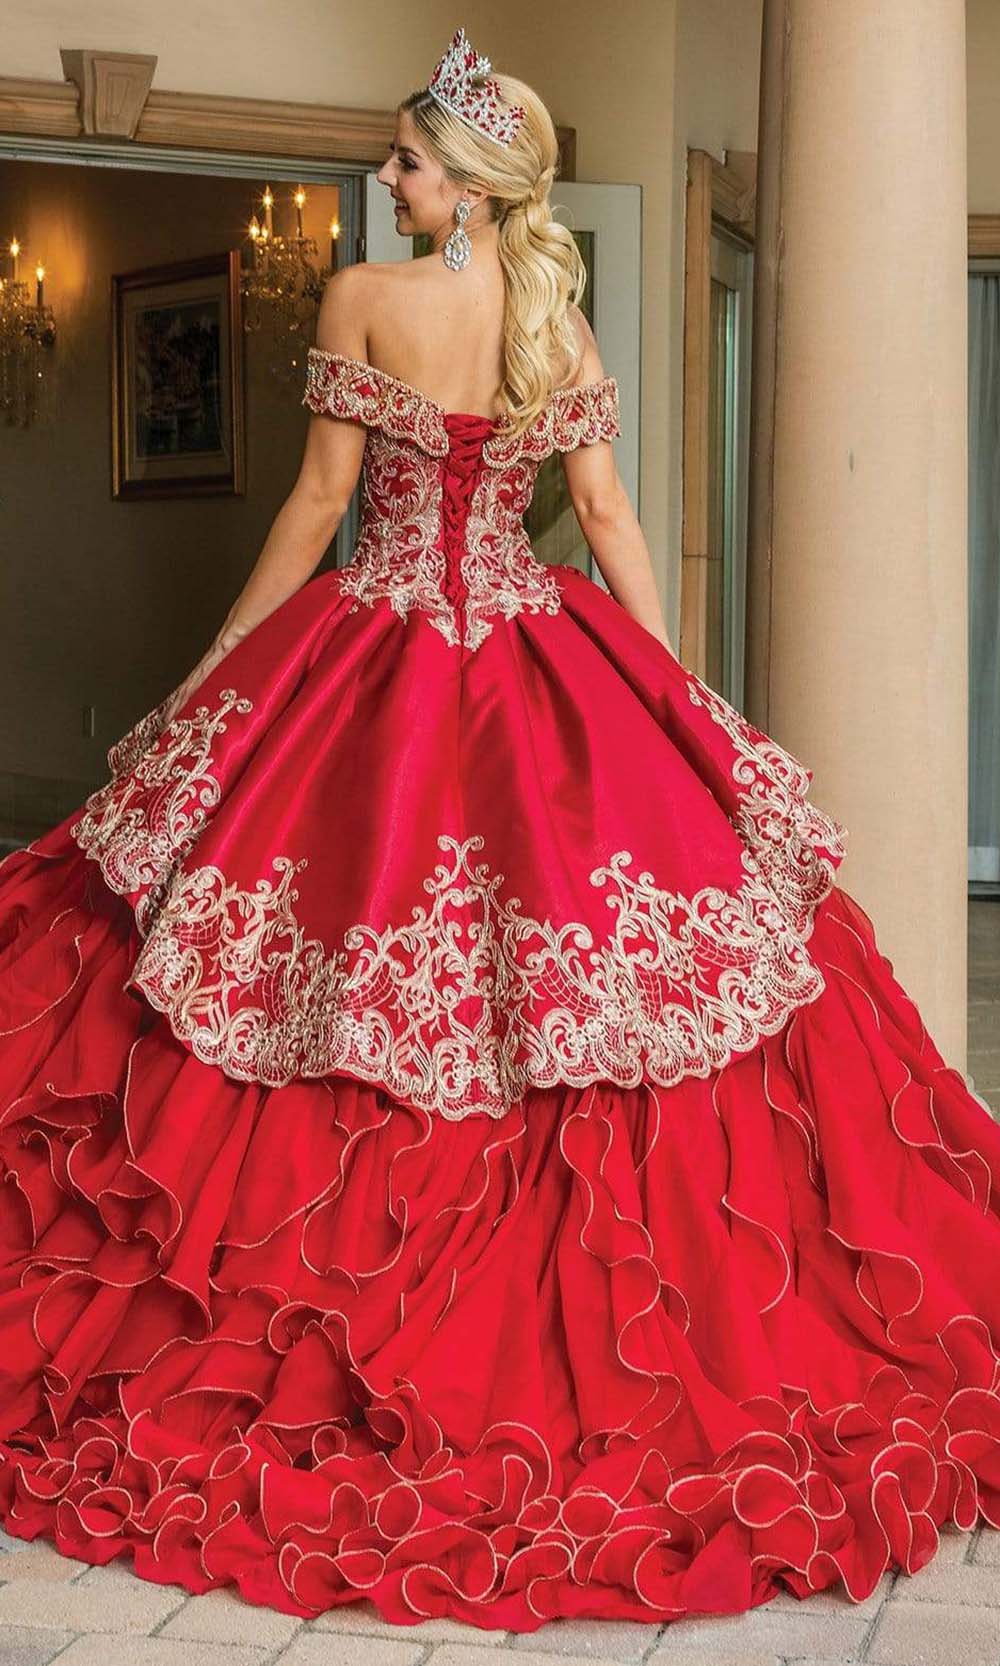 Dancing Queen - 1599 Applique-Ornate Ruffled Ballgown Special Occasion Dress